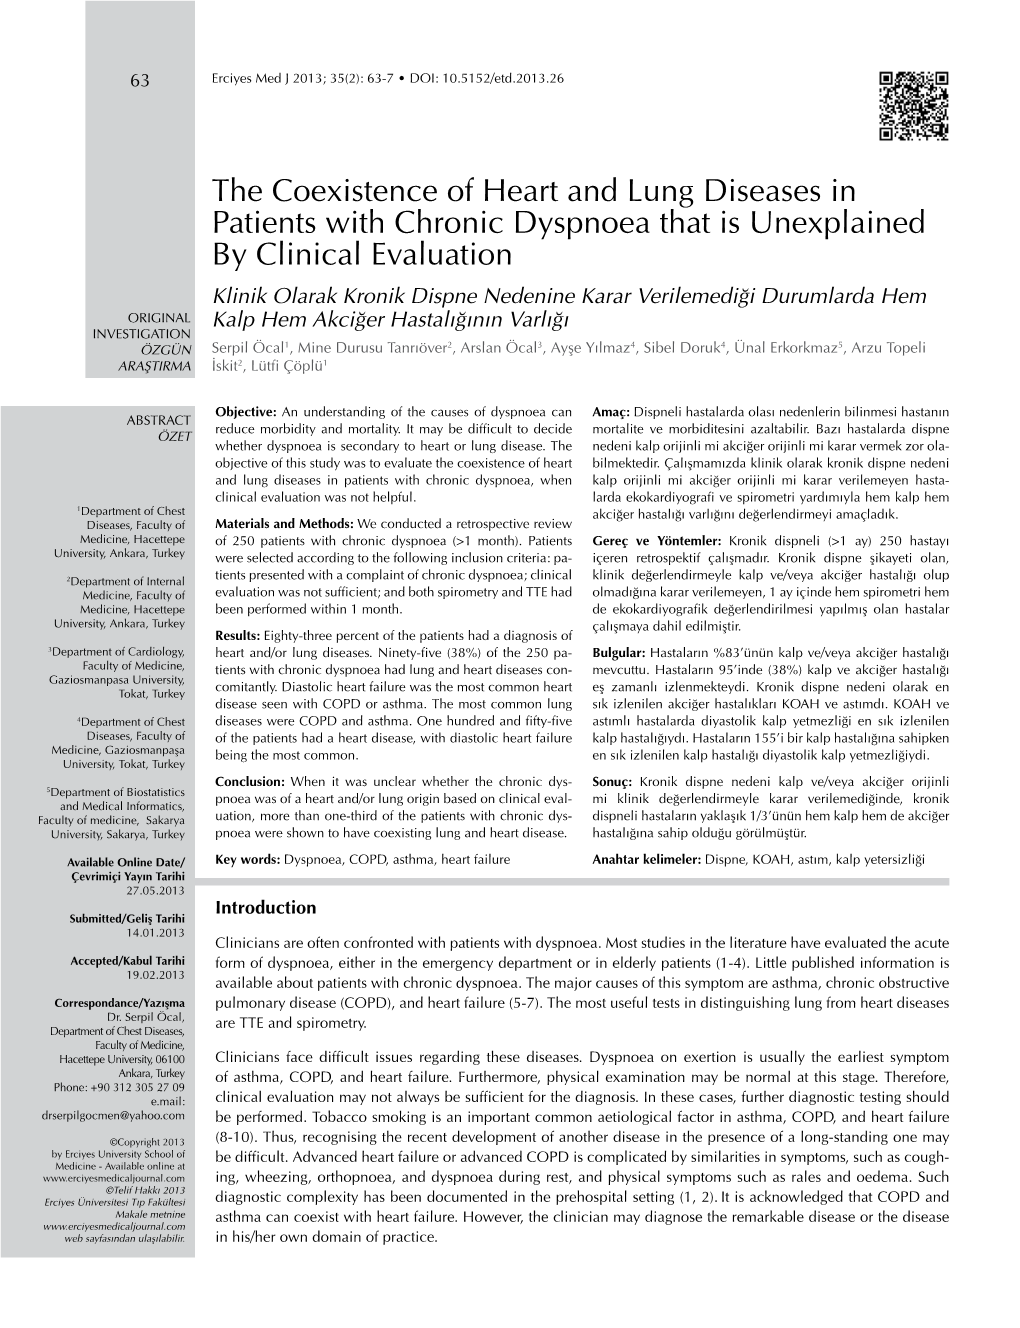 The Coexistence of Heart and Lung Diseases in Patients with Chronic